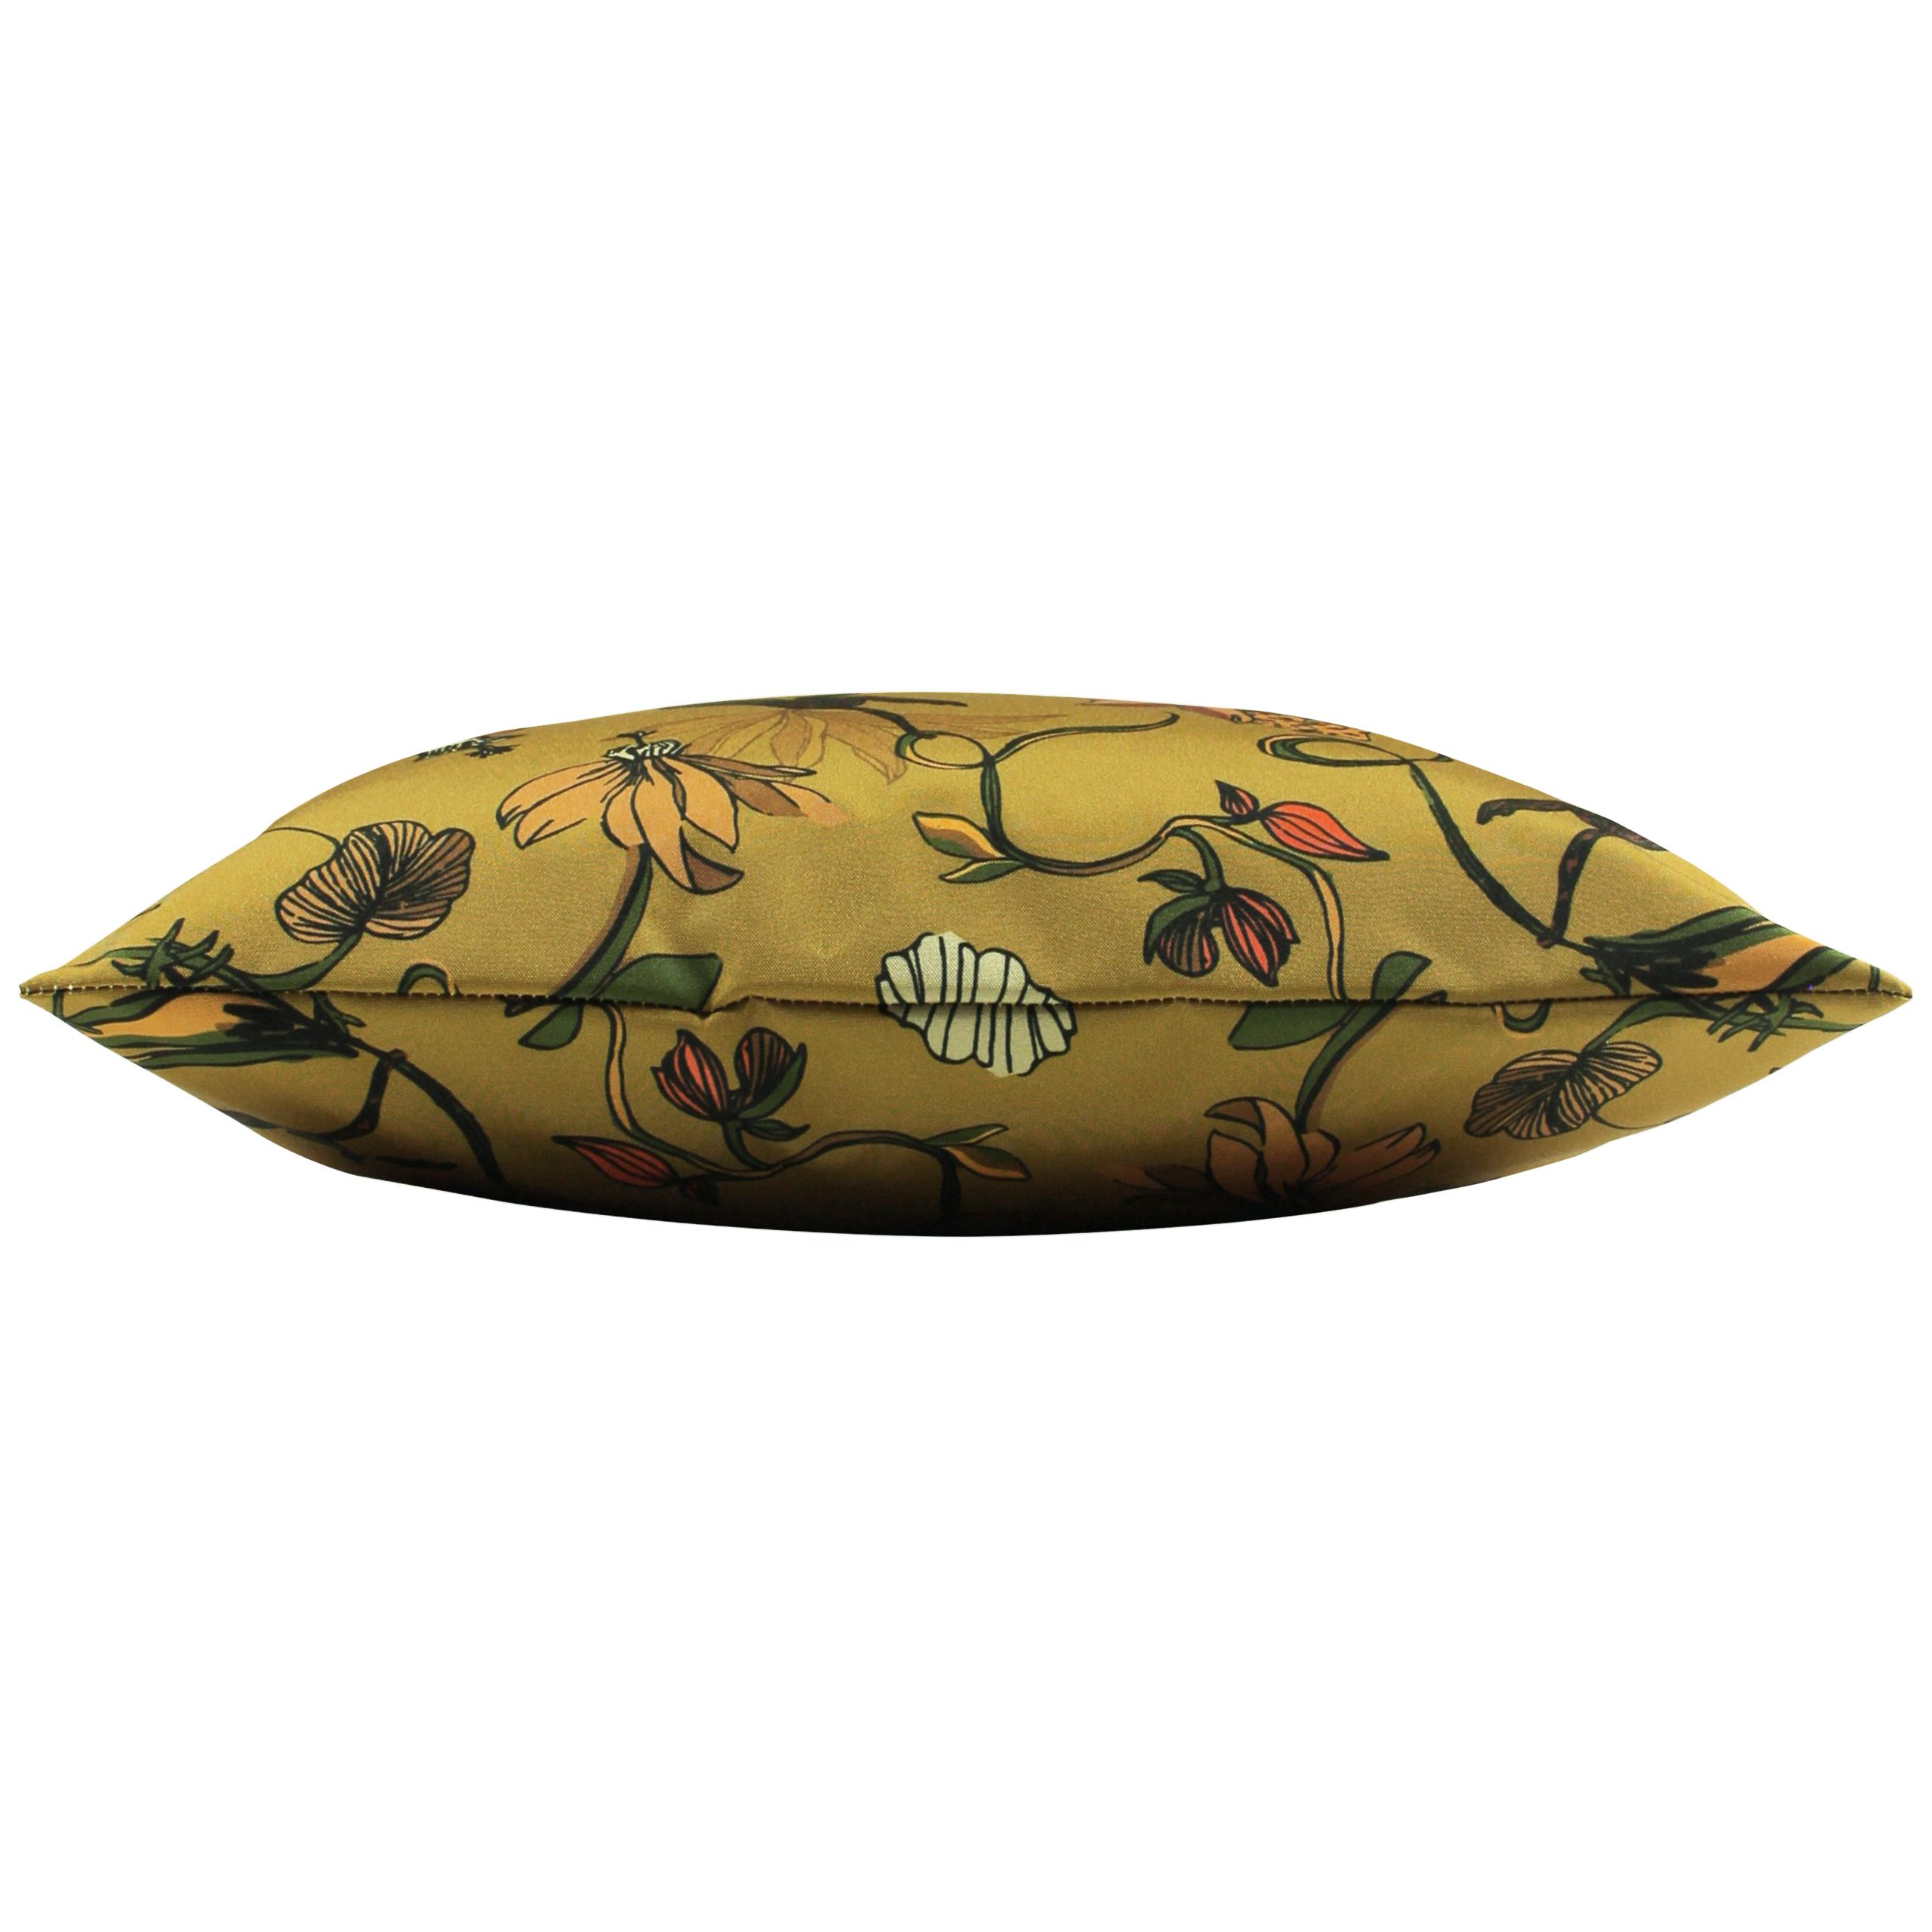 Add drama to your garden with a striking botanical themed cushion. This cushion captures a variety of tropical leaves and flowers in their bright and rich colours. With the main focal point being poised leopards and monkeys, this cushion is a beautiful addition to any outdoor space.